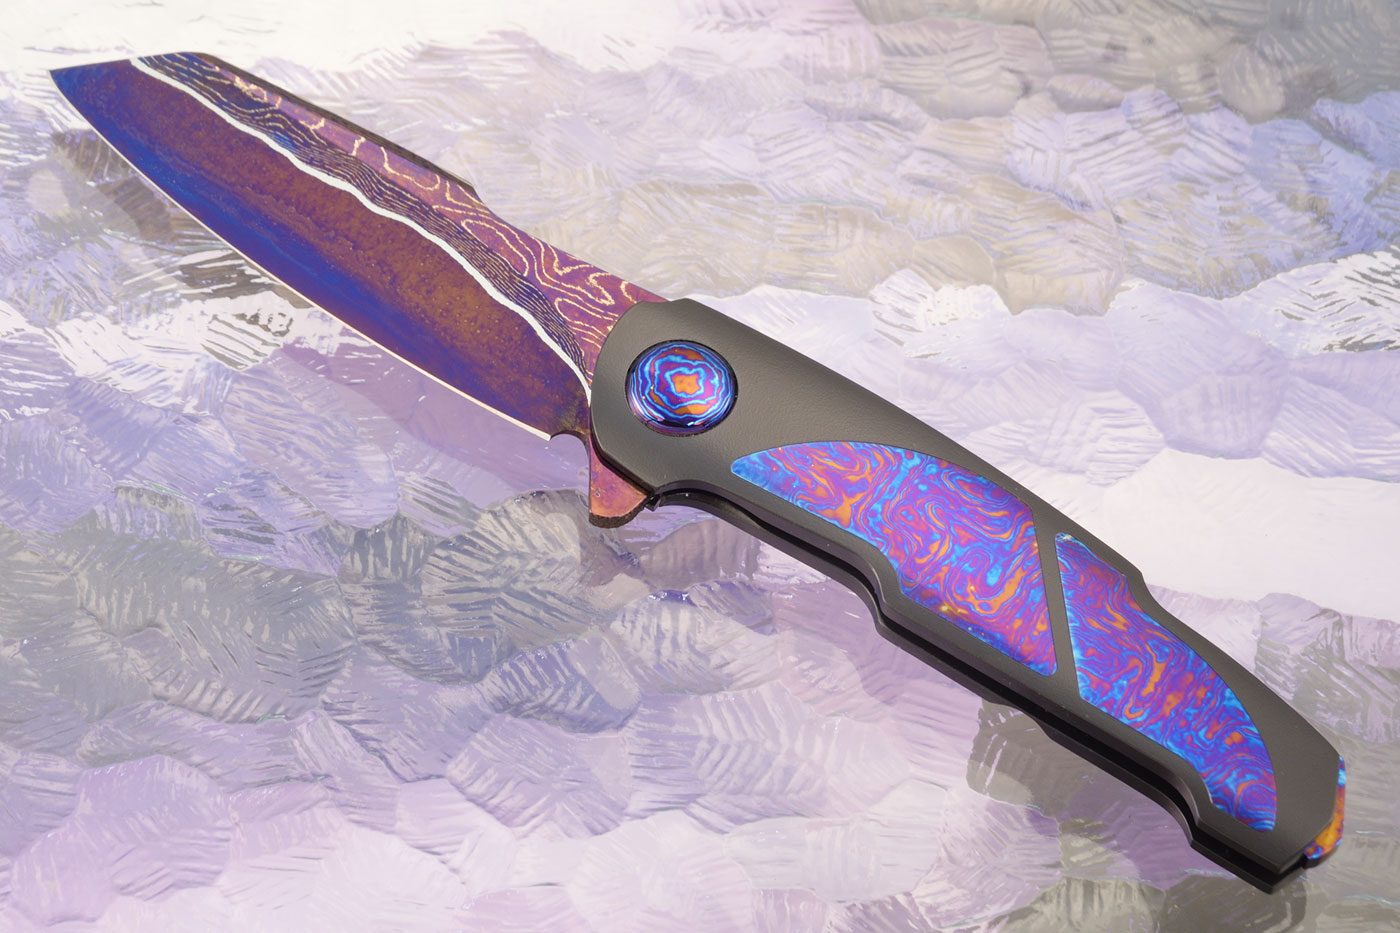 Boudicca Flipper with Skyline Damascus and Twin Pockets Timascus (Ceramic IKBS)